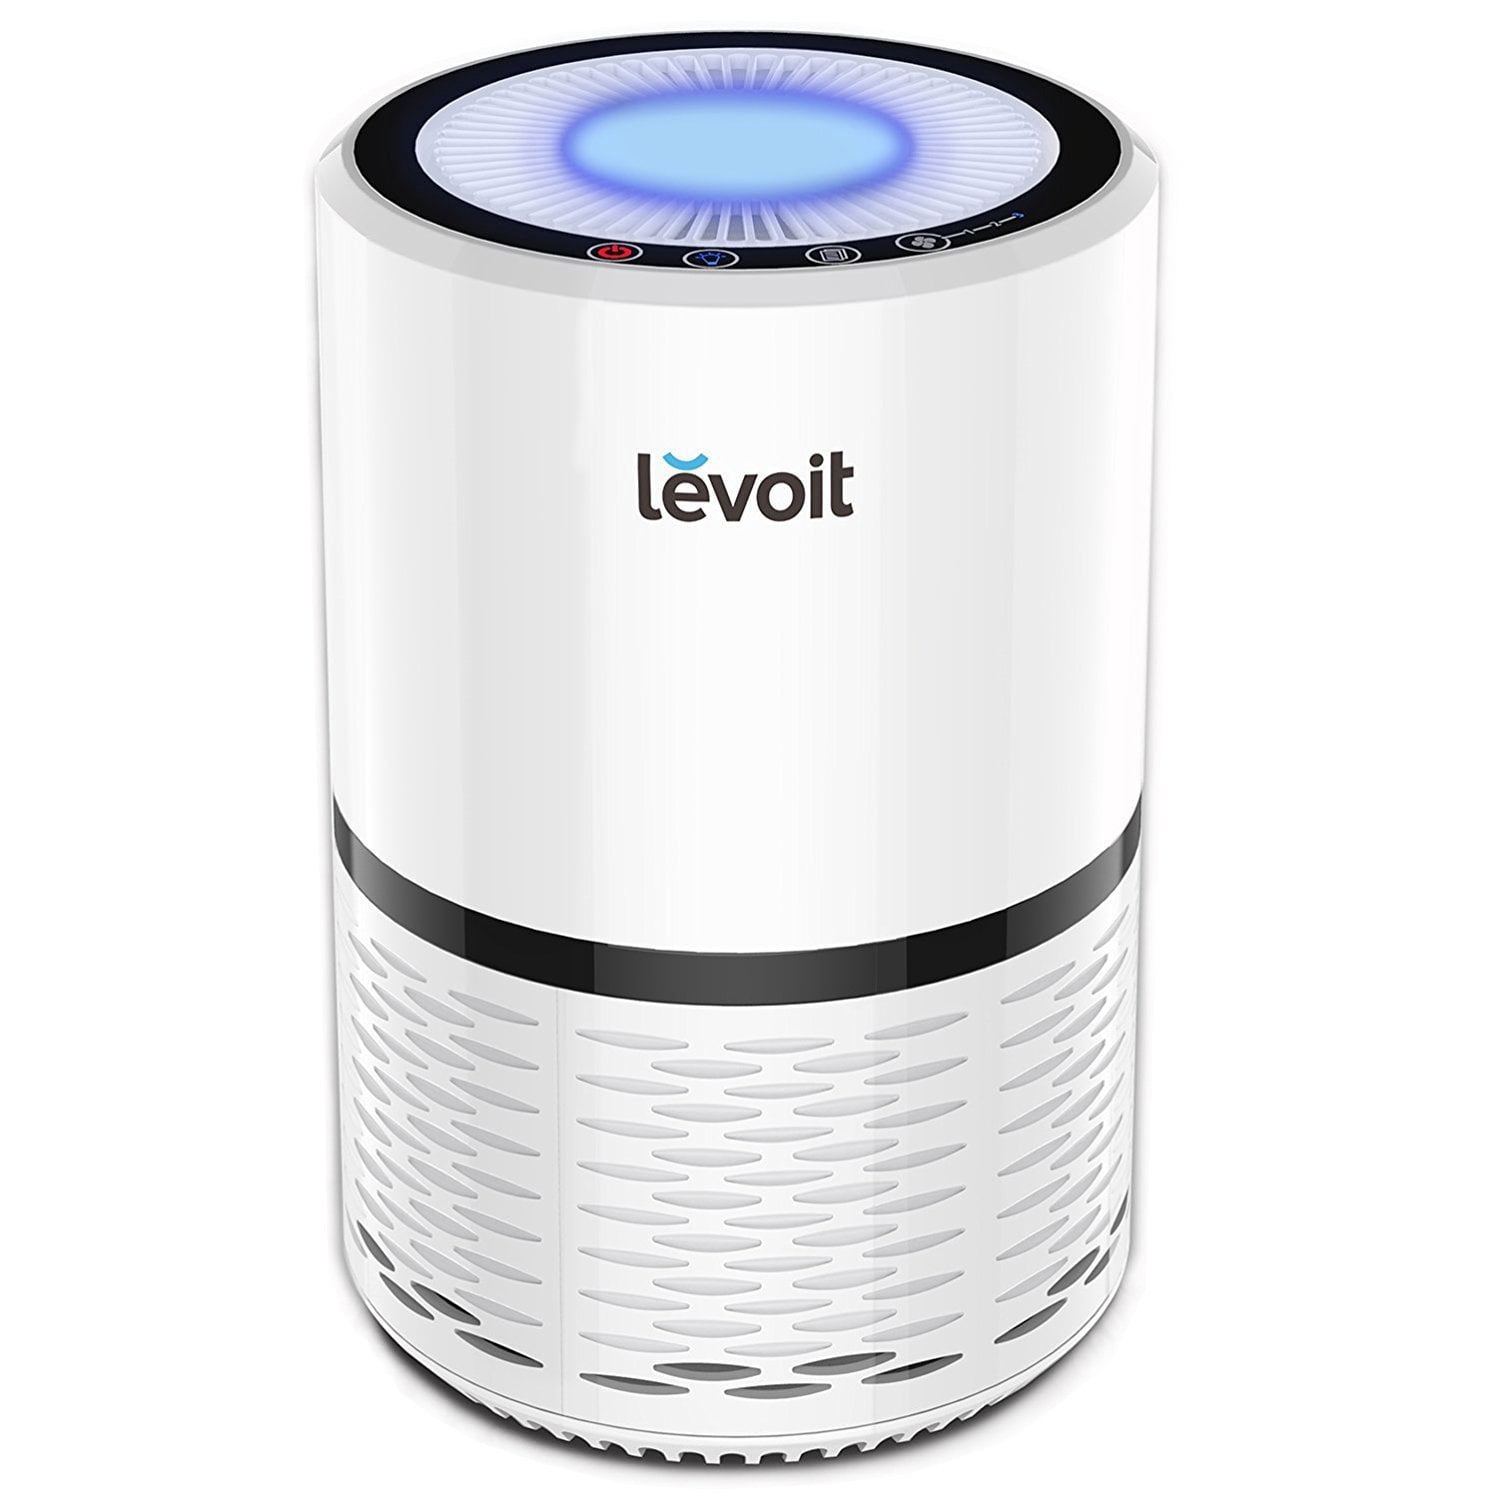 Levoit LV-H132 Air Purifier with True HEPA Filter for Smoke